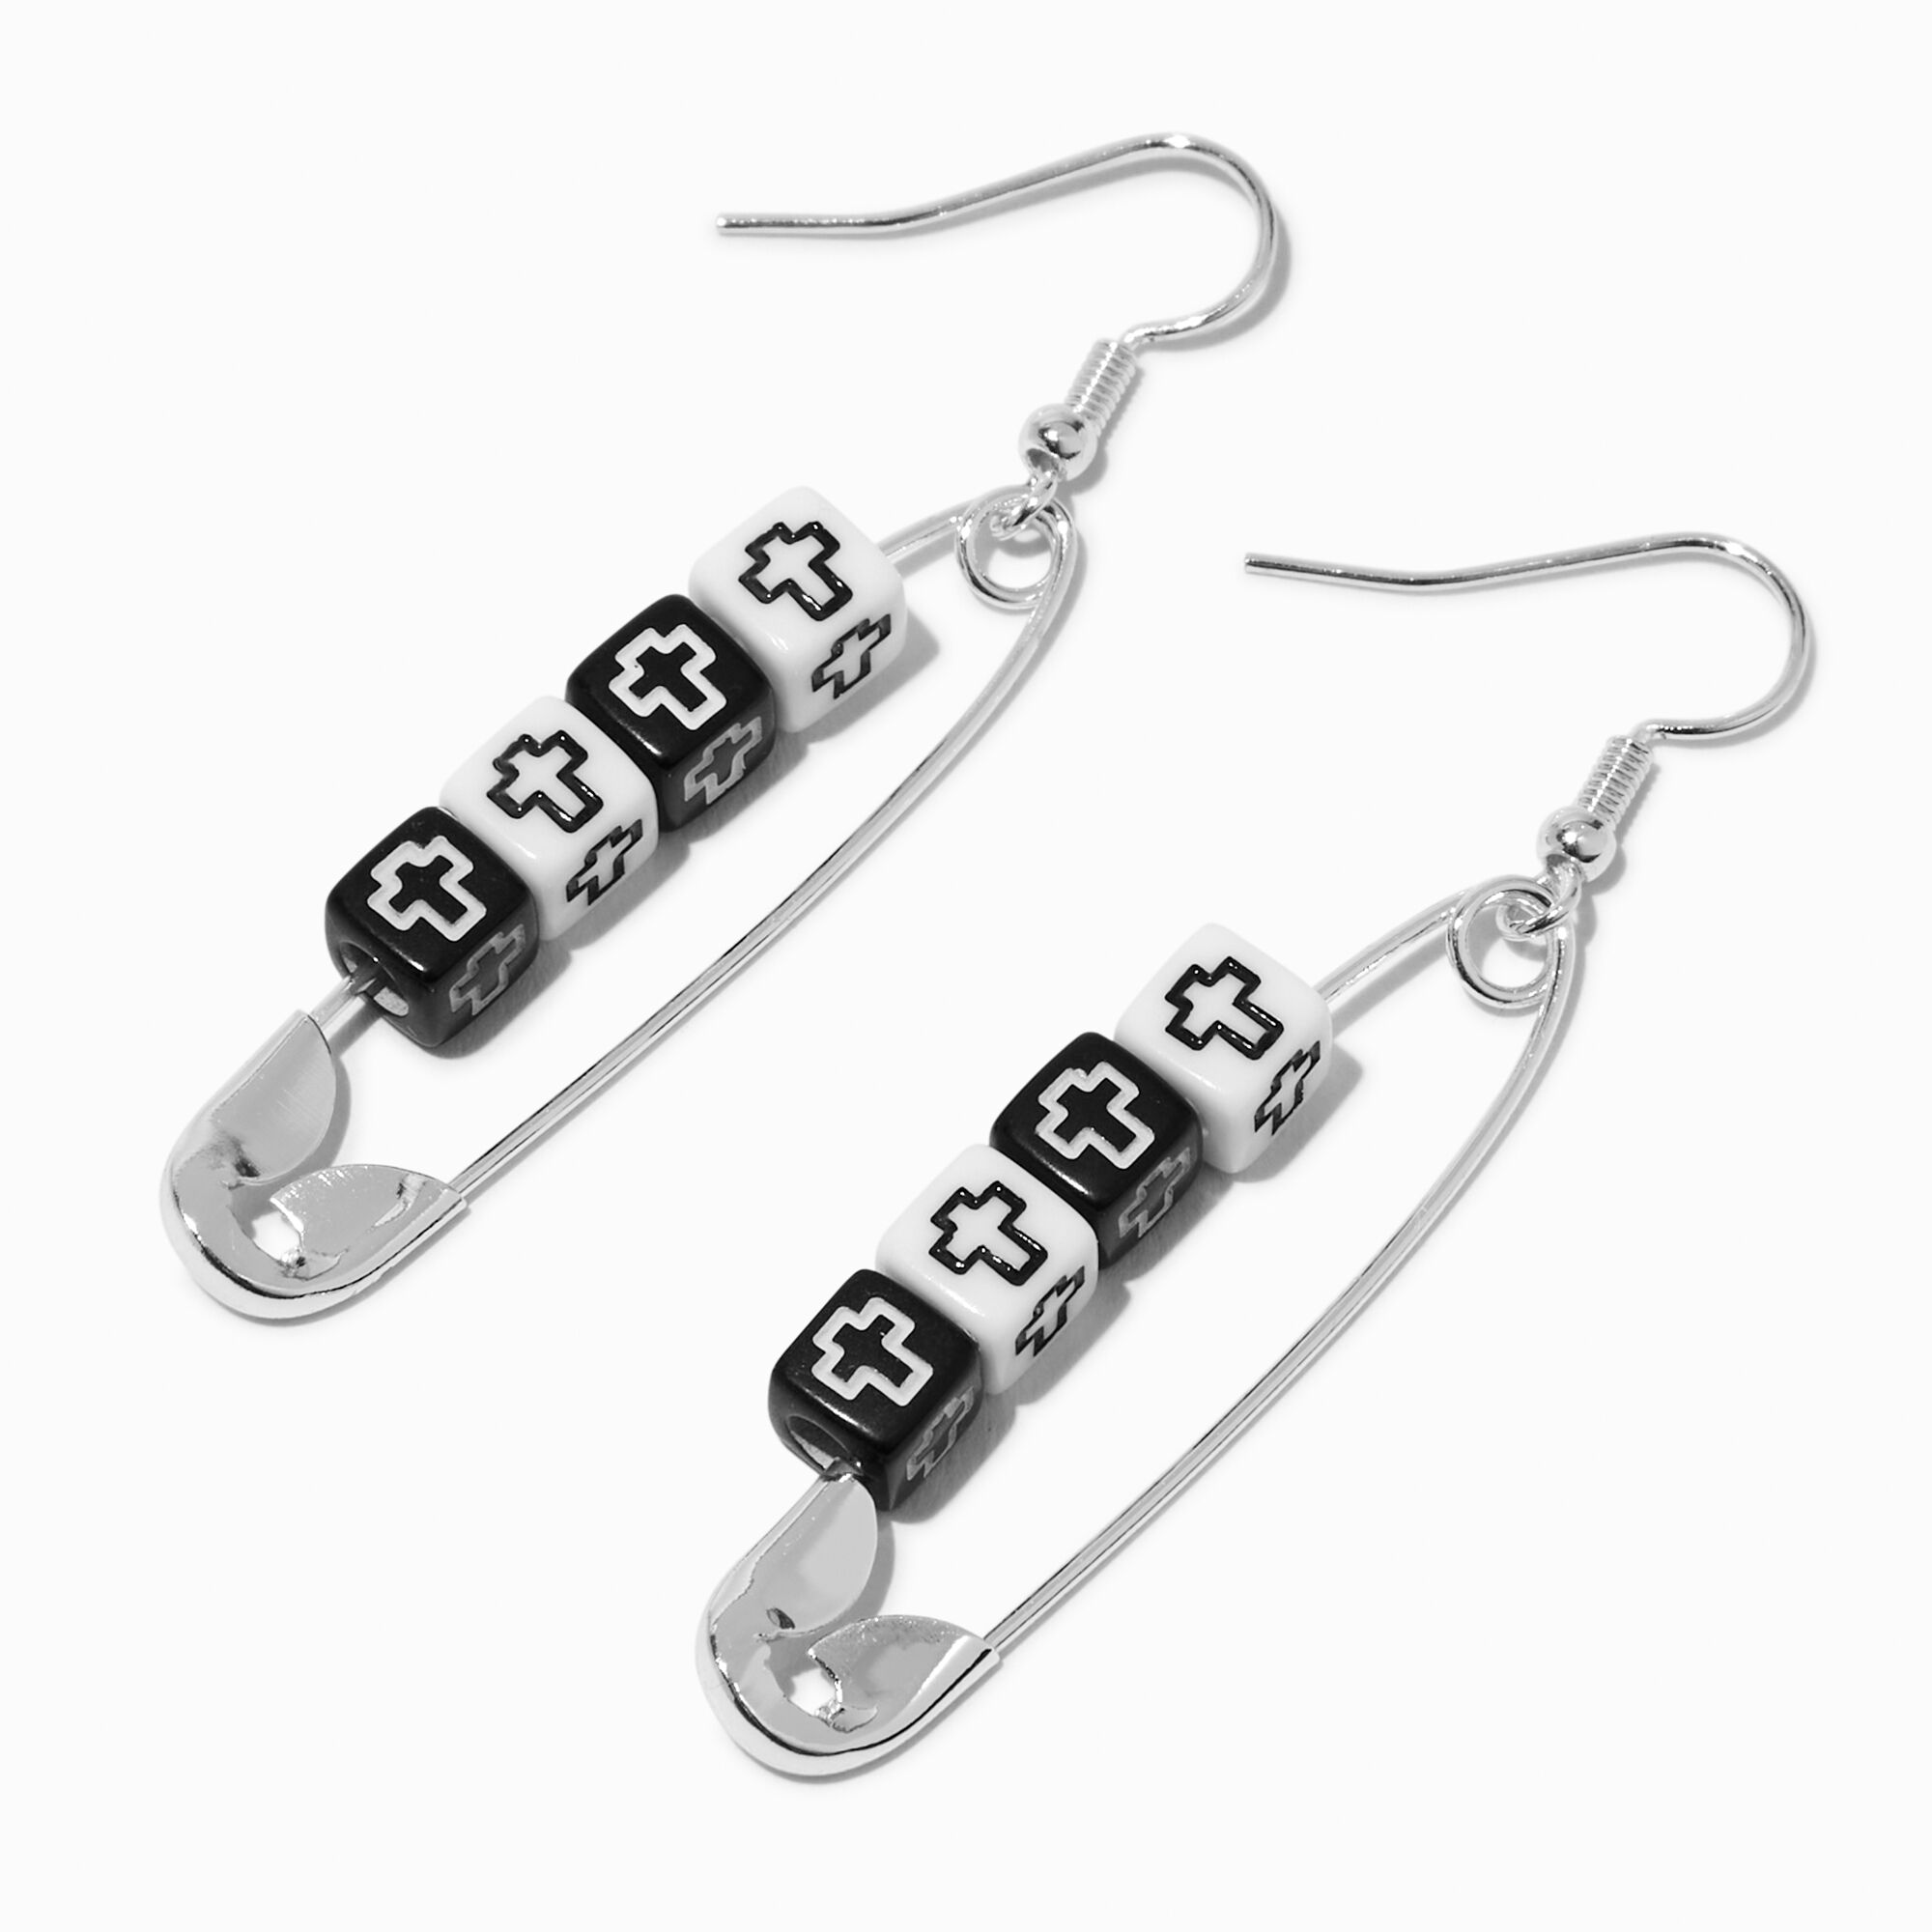 View Claires Cross Safety Pin 2 Drop Earrings White information